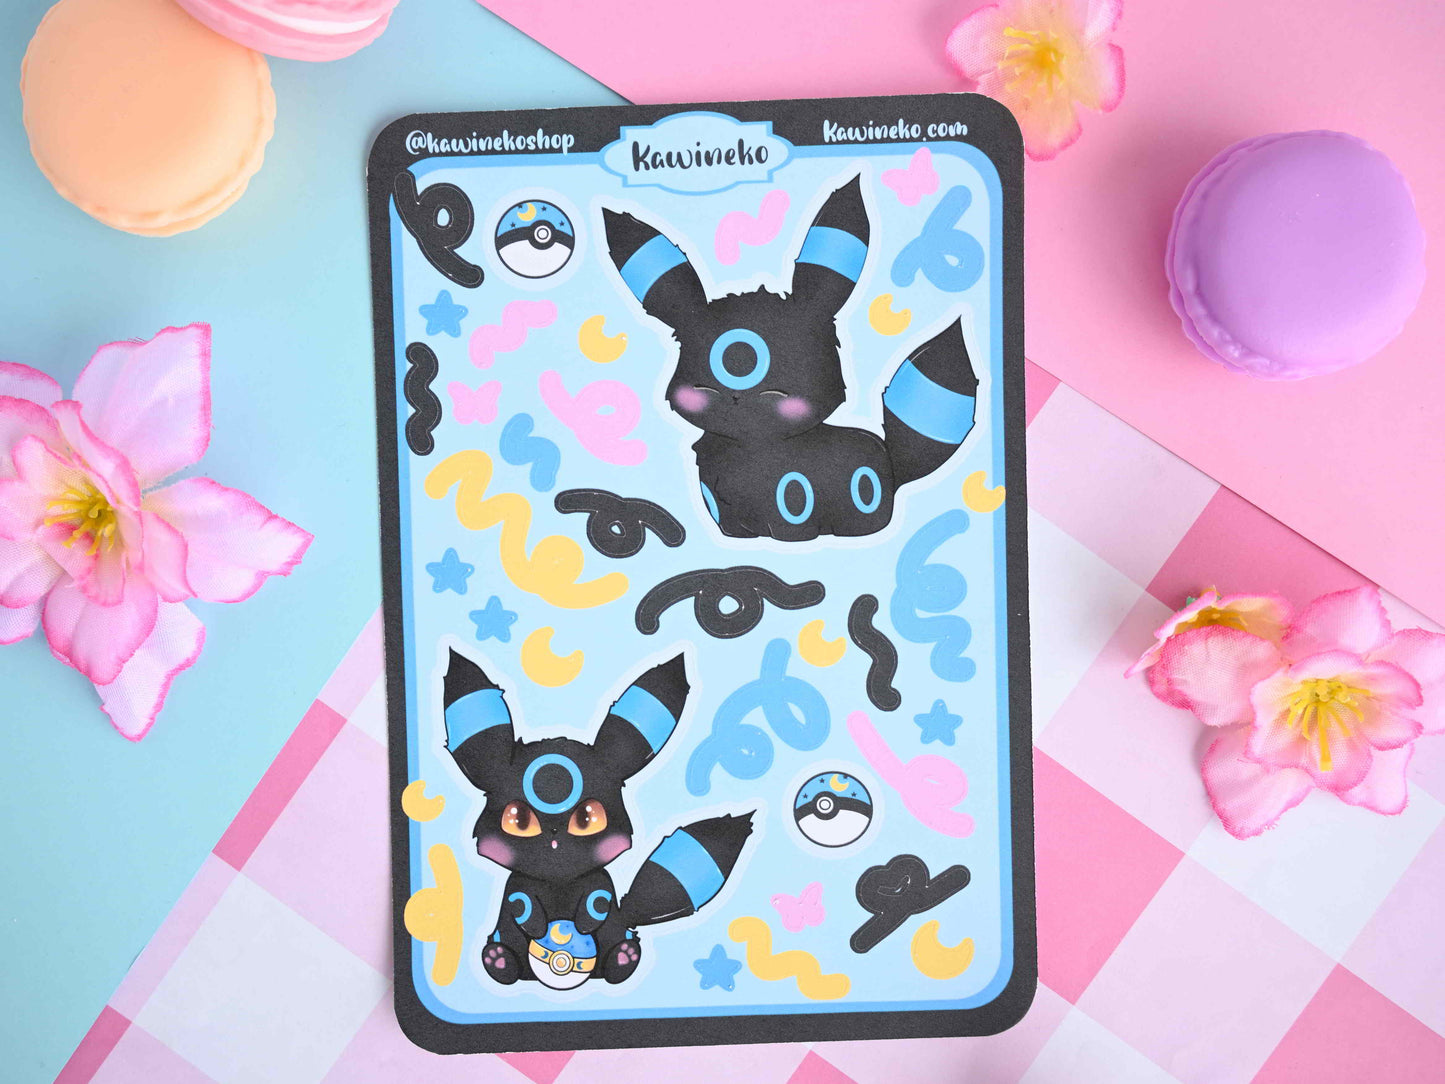 Umbreon Pokemon color core sticker sheets with decos and ribbons black